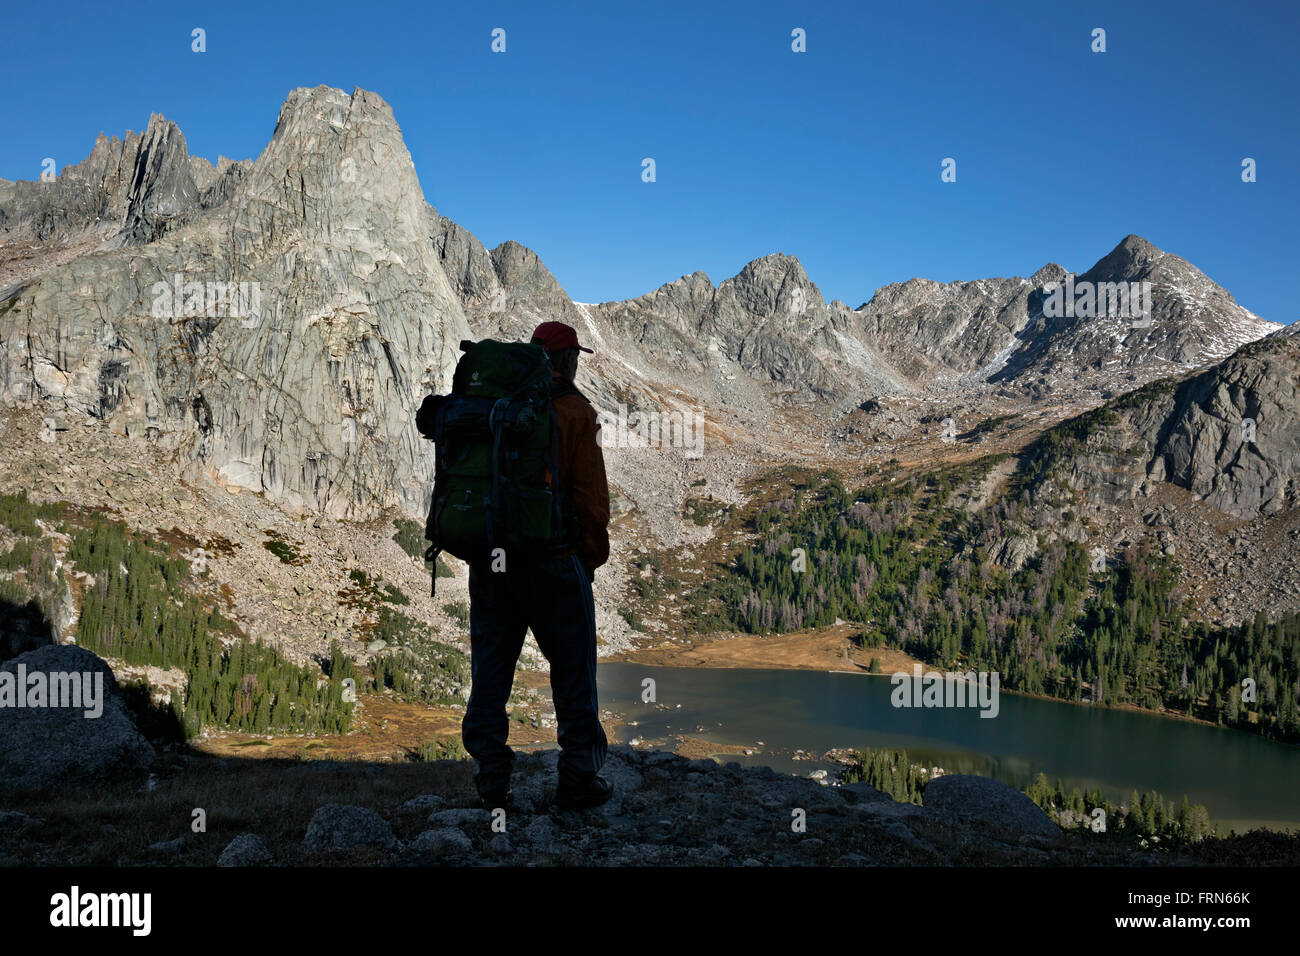 WYOMING - Hiker on Big Sandy Pass Trail overlooking Lonesome Lake surrounded by Cirque of the Towers in the Wind River Range. Stock Photo